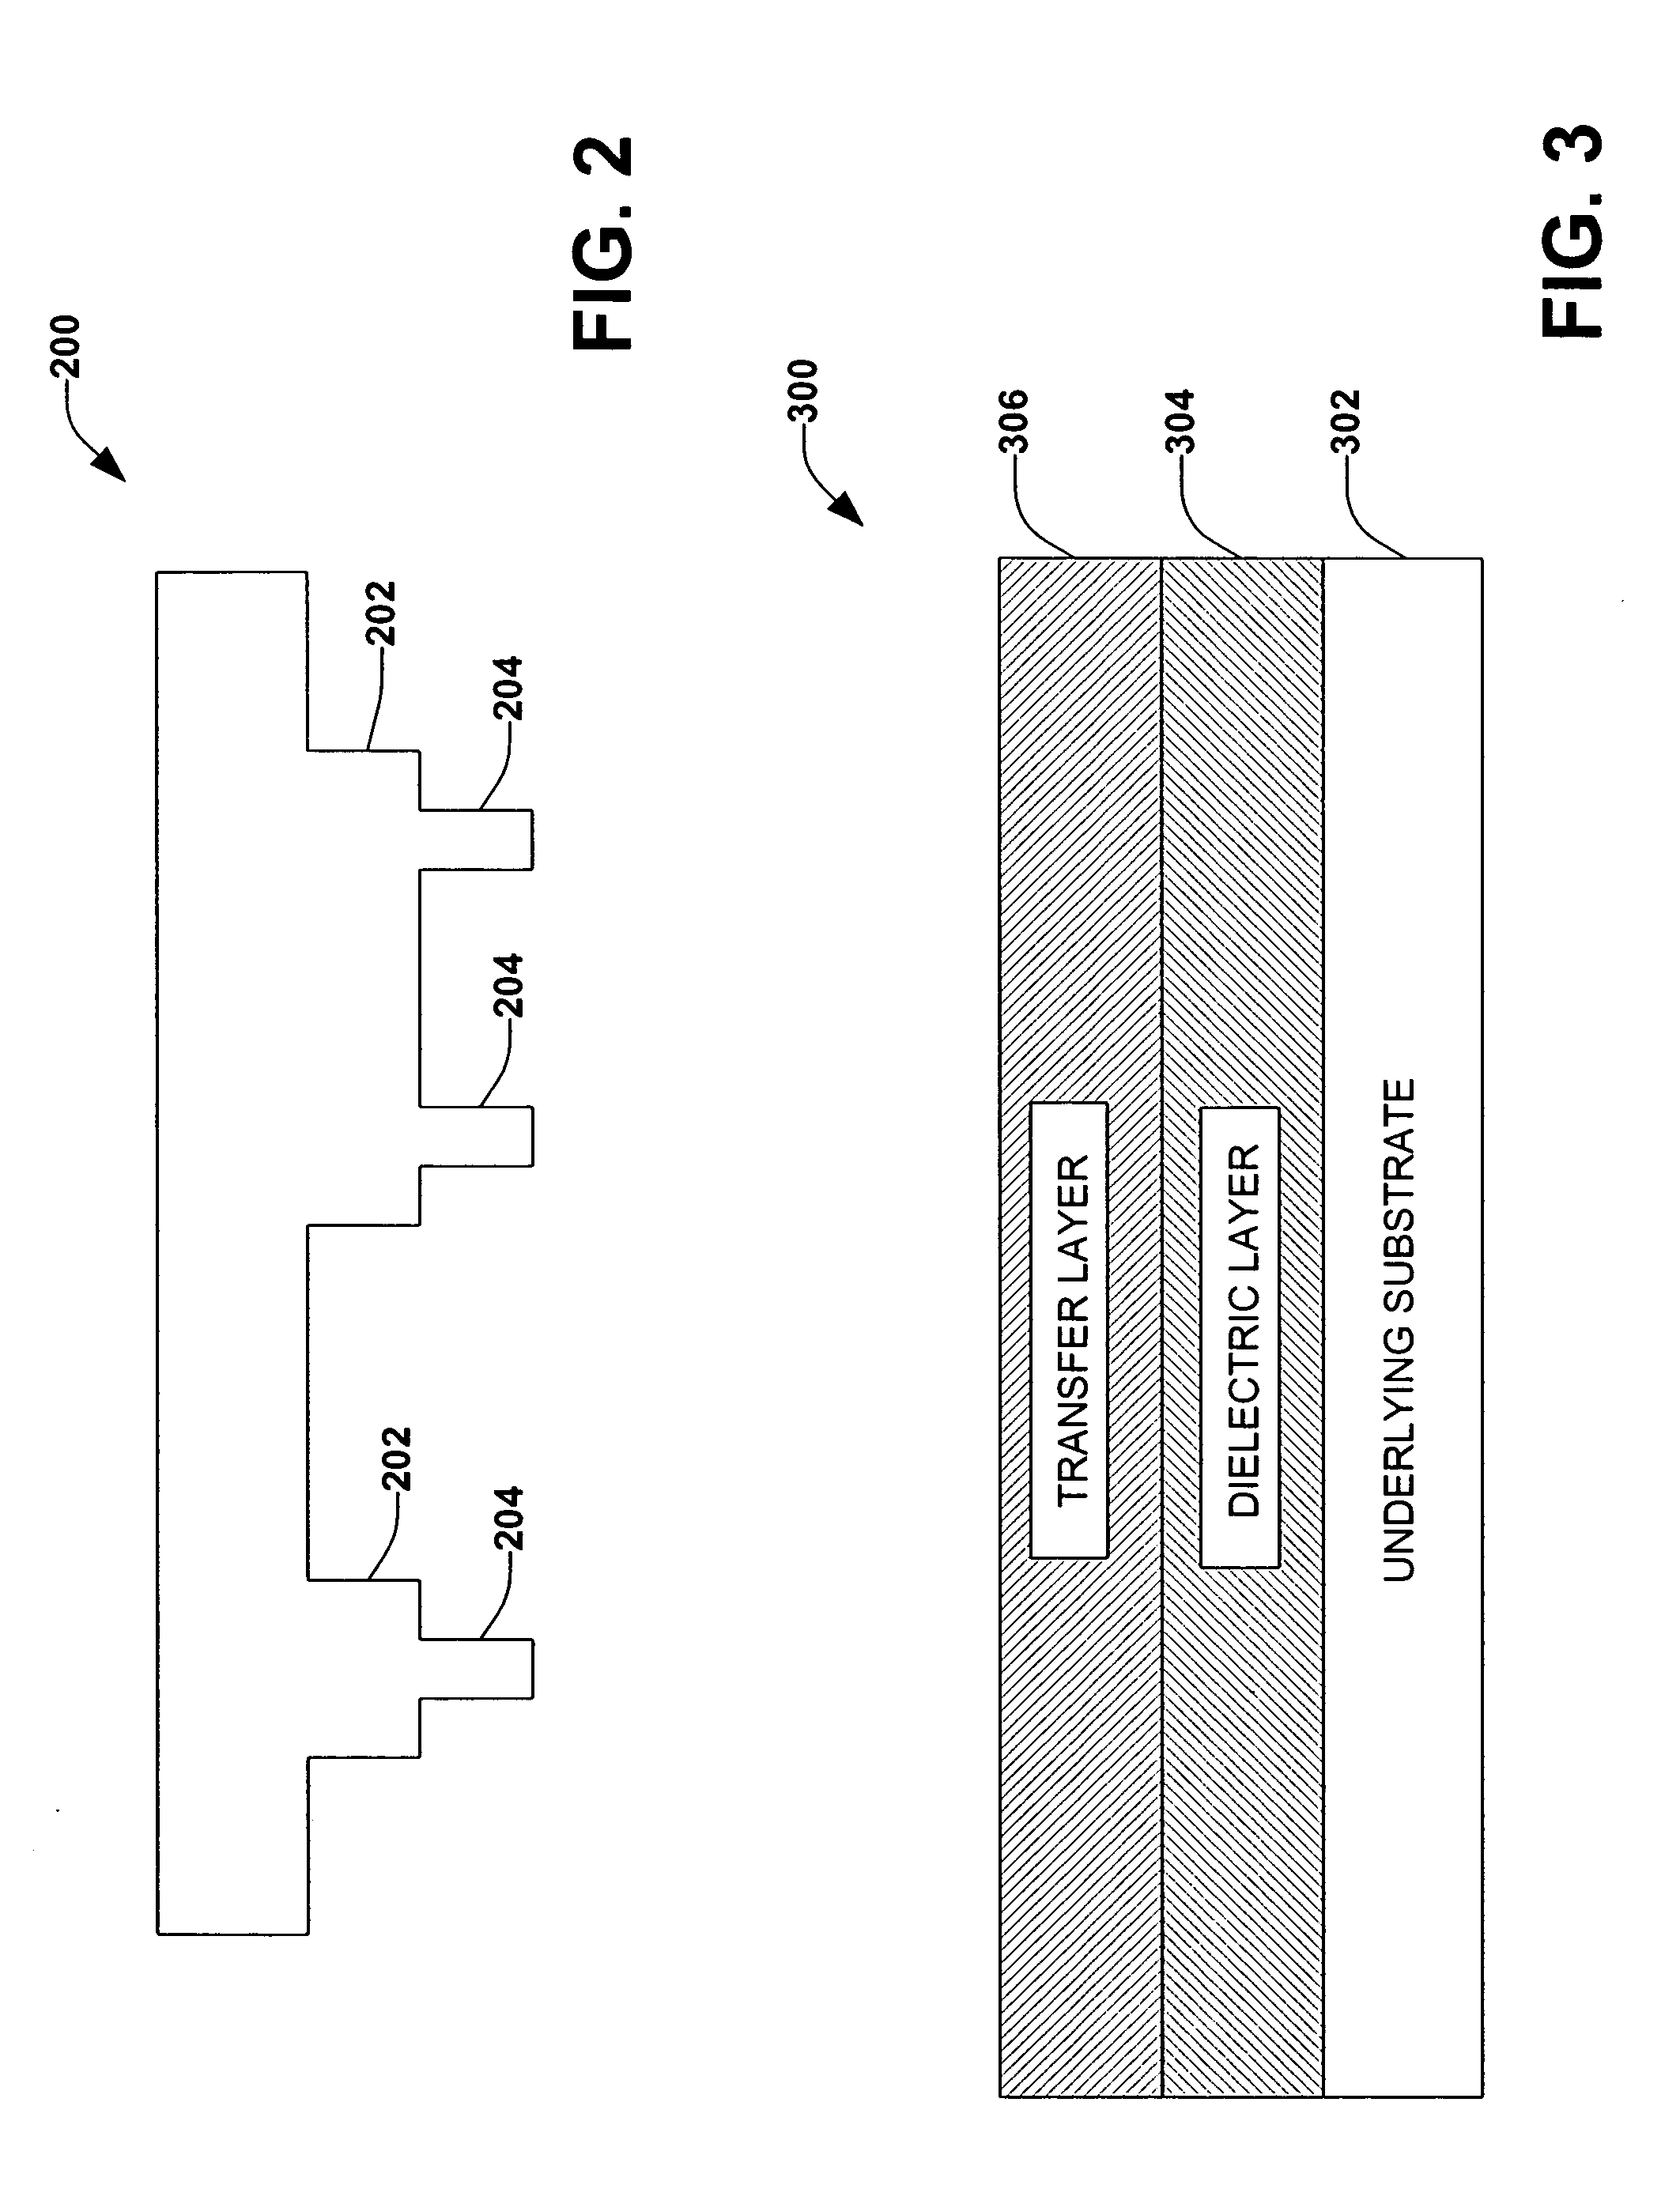 System and method for imprint lithography to facilitate dual damascene integration in a single imprint act